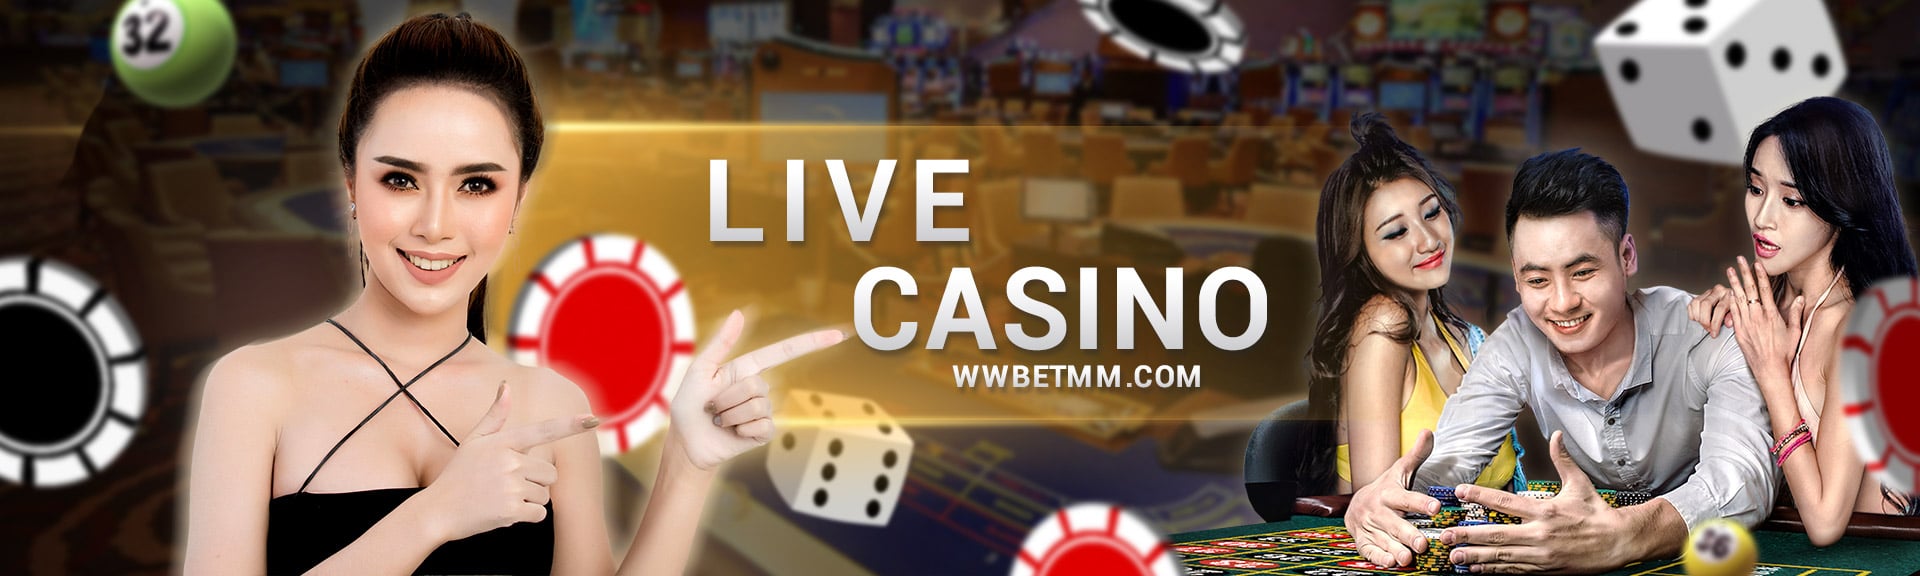 Live Casino with Real Money in Myanmar | WWBET